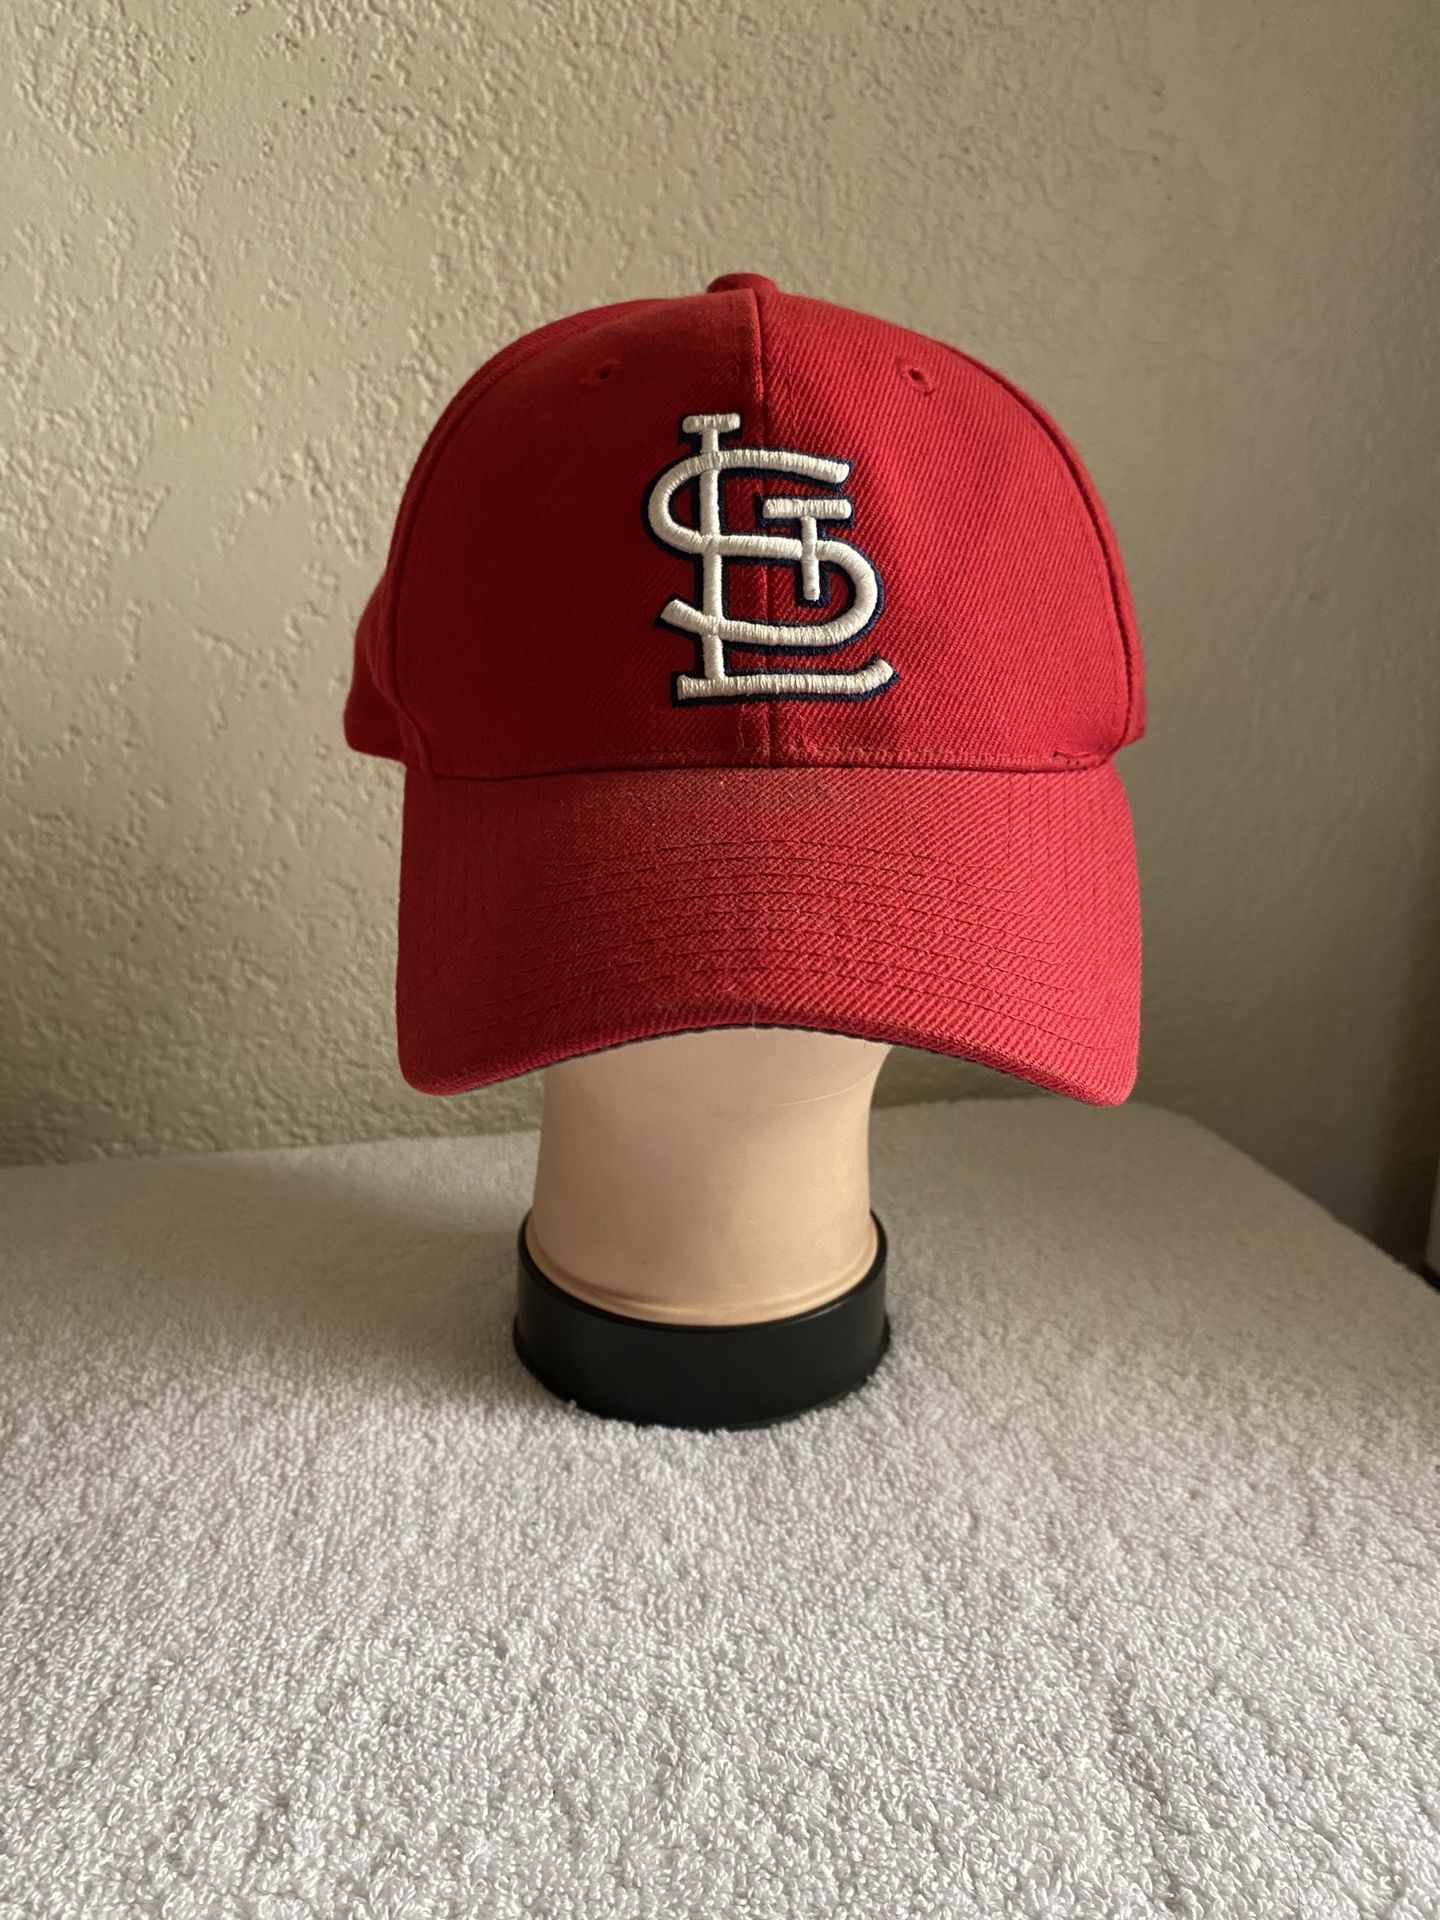 St Louis Cardinals MLB “Sports Specialties” Genuine Merchandise Hat Cap.  Made in Bangladesh for Sale in Whittier, CA - OfferUp